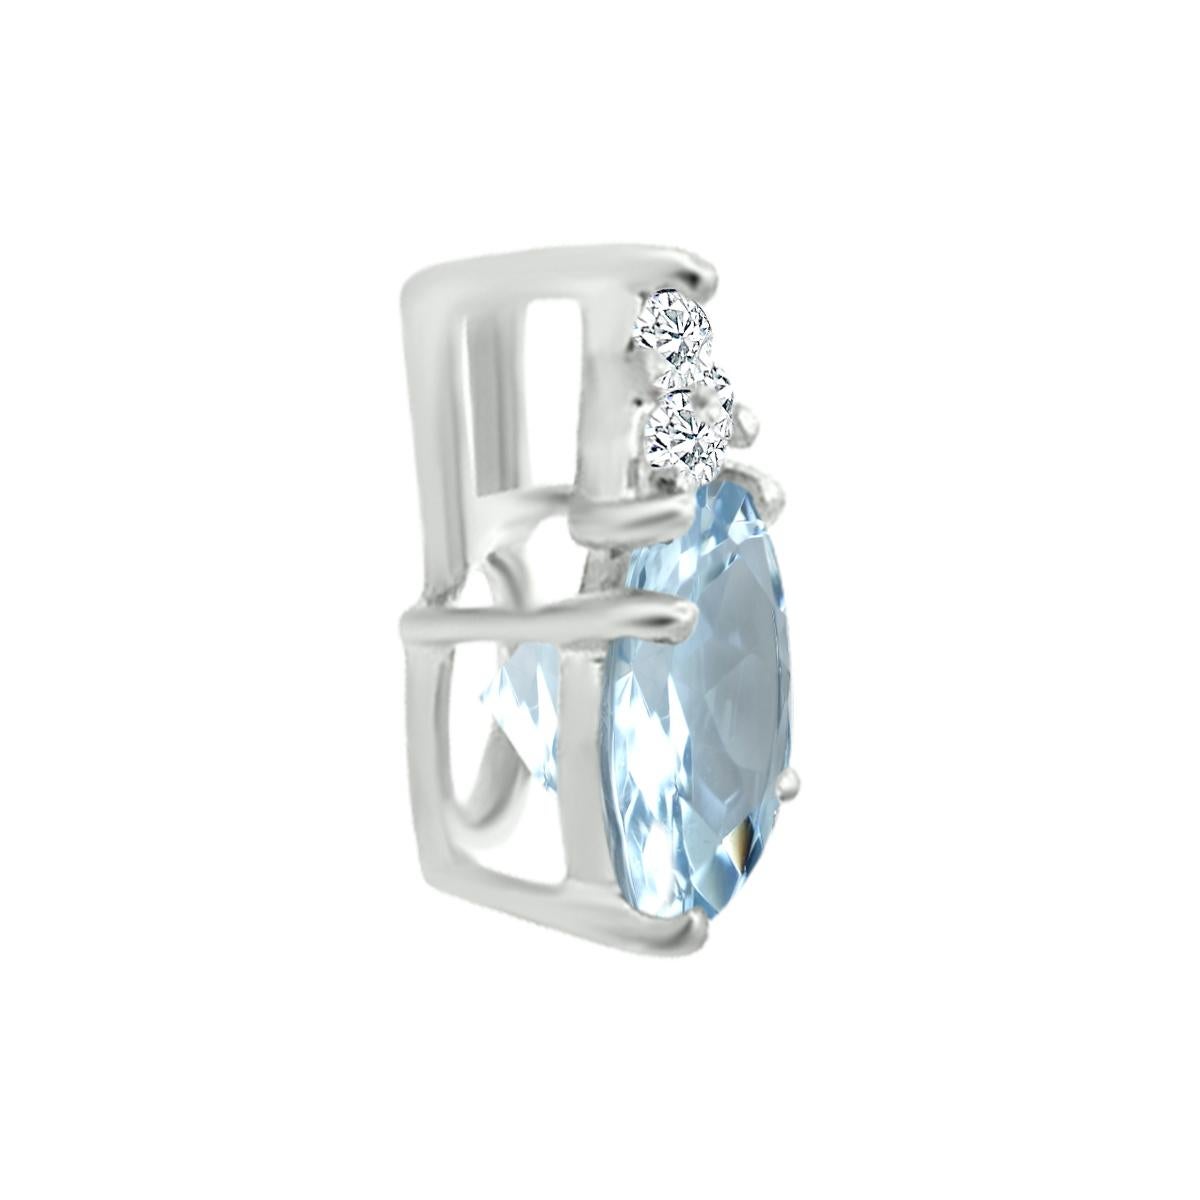 No Matter Which Era Is Your Favourite, This 14K White Gold Round Shaped Aquamarine Pendant Will Enhance Your Every Look.
This Natural 7mm Beautiful Aquamarine And Diamond Pendant Is A Statement Piece By Itself And Will Add Luxury To Your Everyday